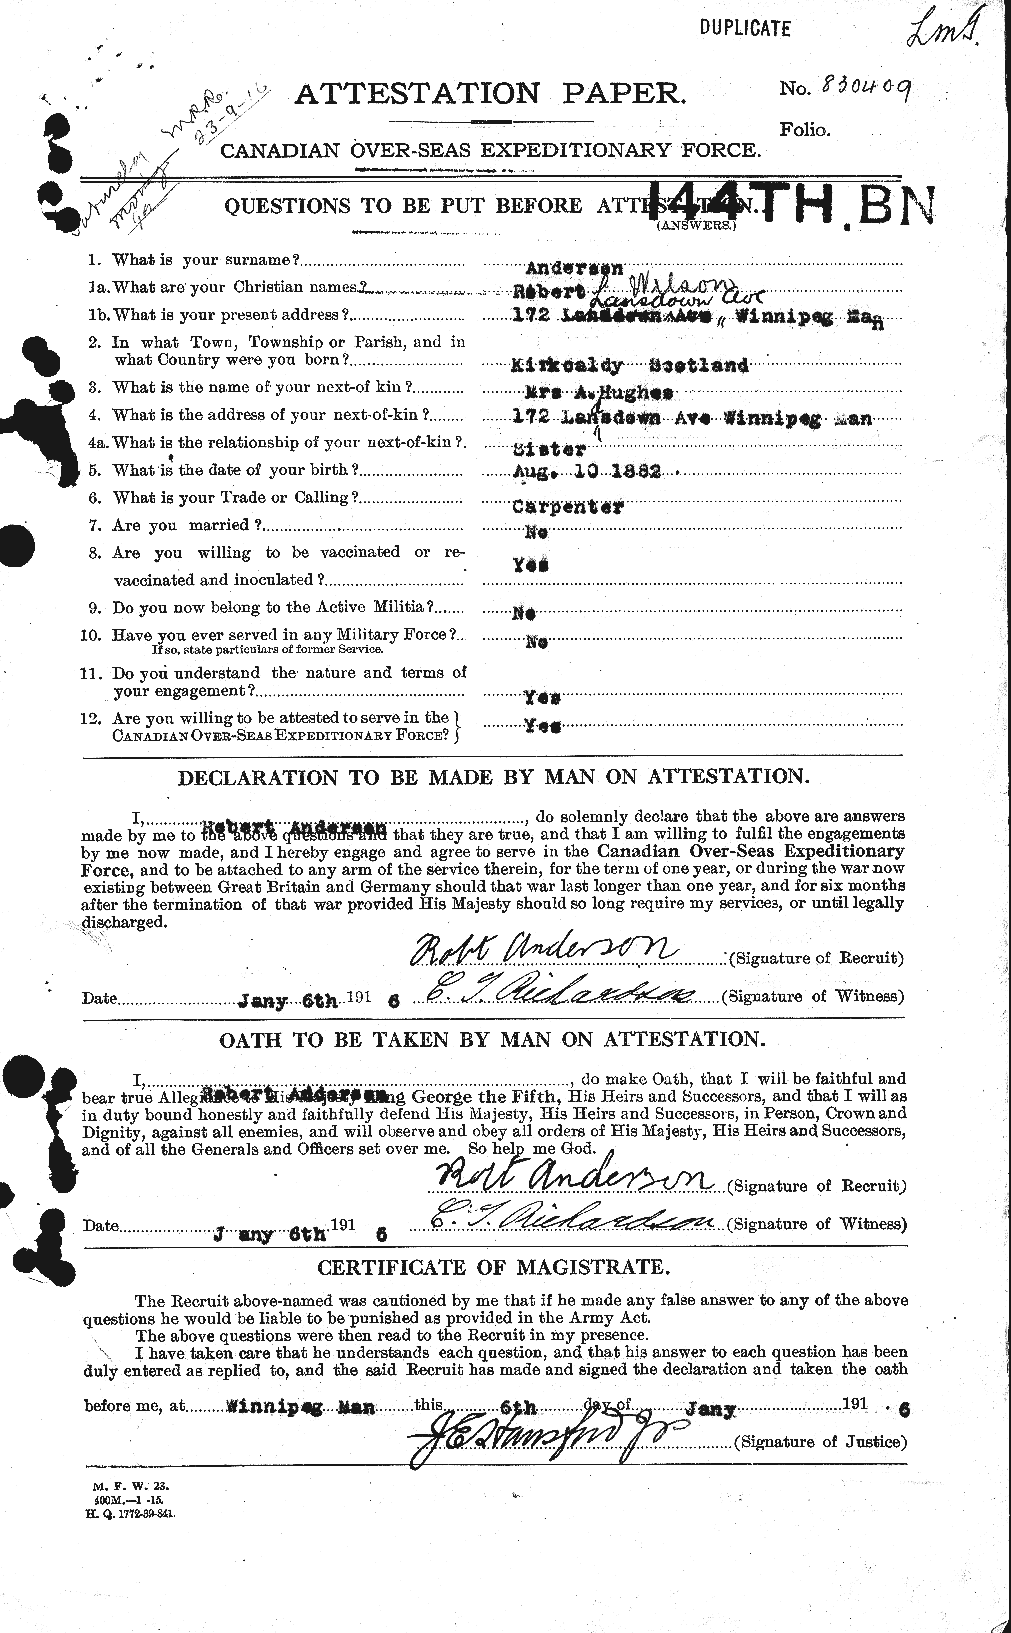 Personnel Records of the First World War - CEF 207219a